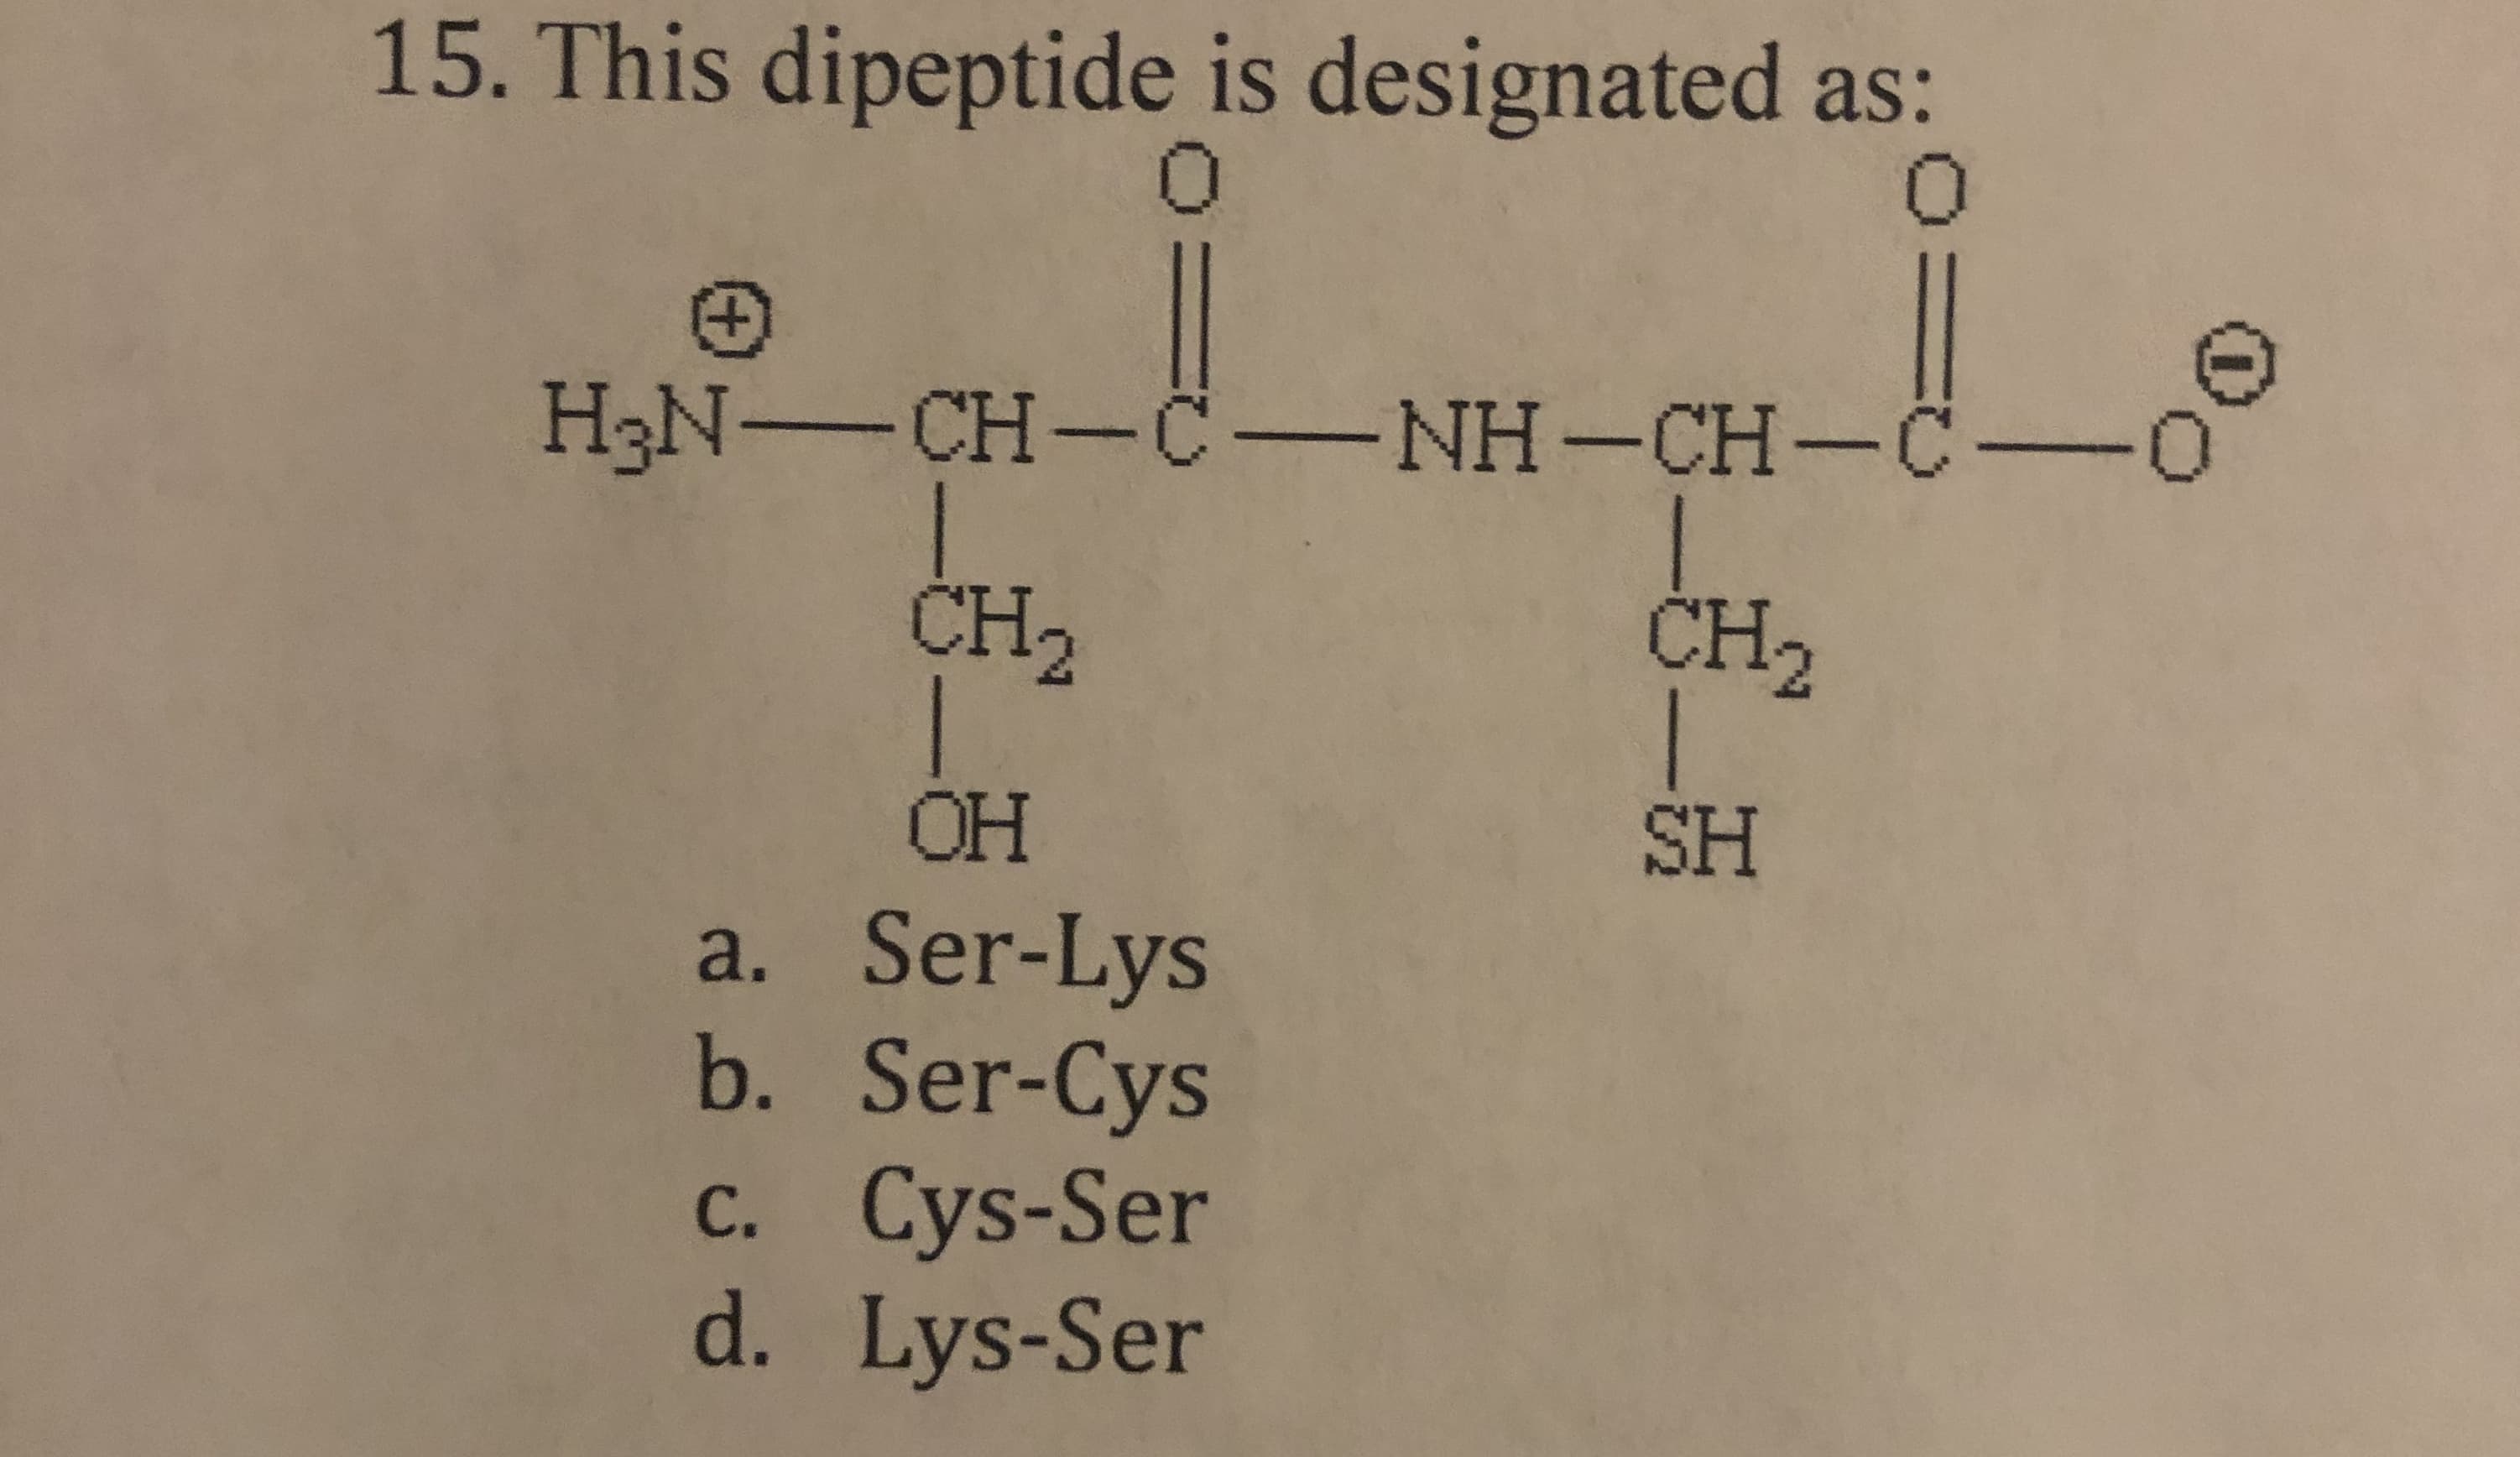 15. This dipeptide is designated as:
0
O
H3N-CH-CNH-CH-C-o
CH2
CH2
OH
SH
a. Ser-Lys
b. Ser-Cys
c. Cys-Ser
d. Lys-Ser
